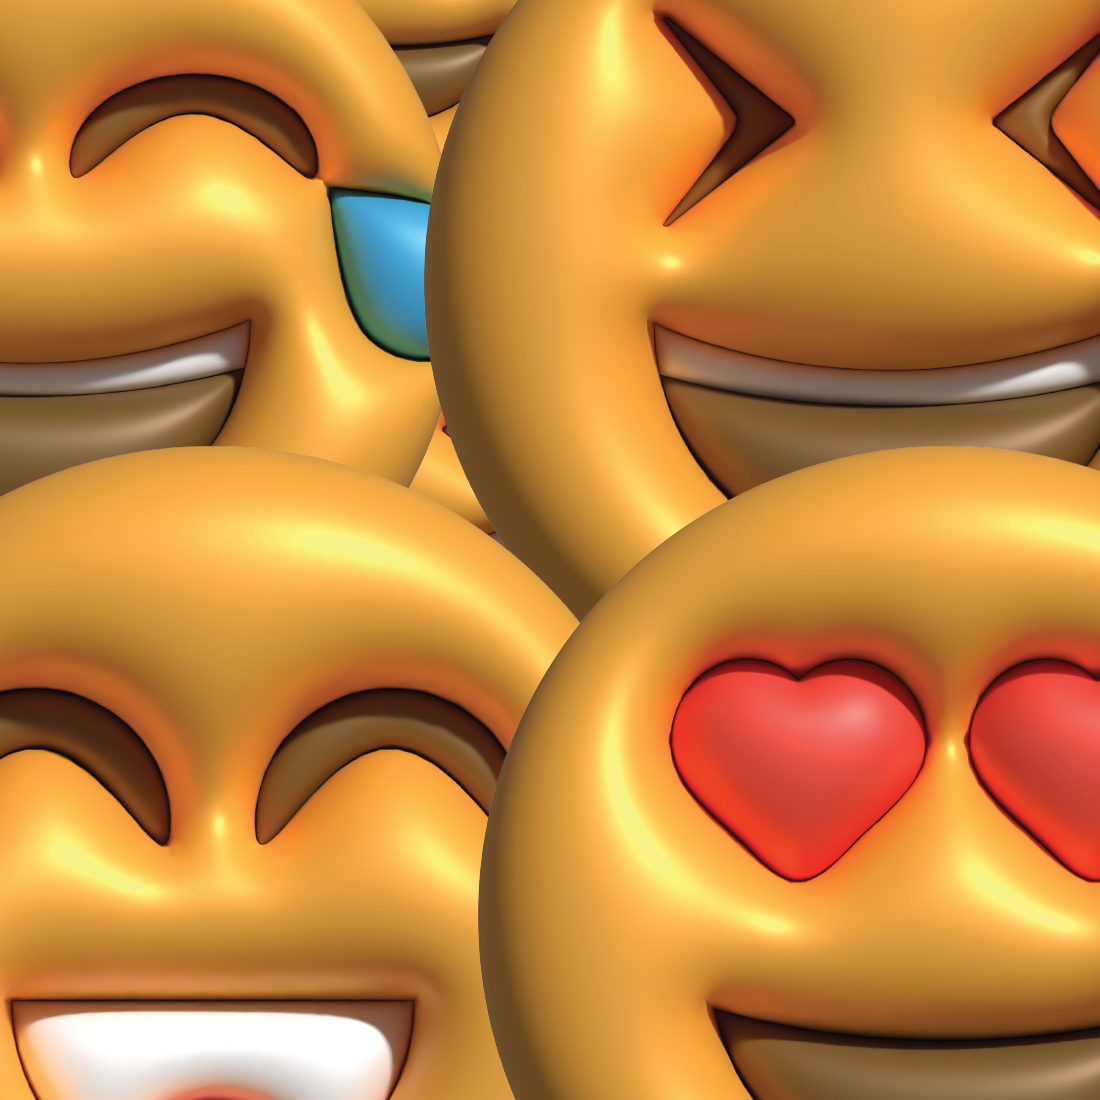 Bunch of emoticions with hearts on them.